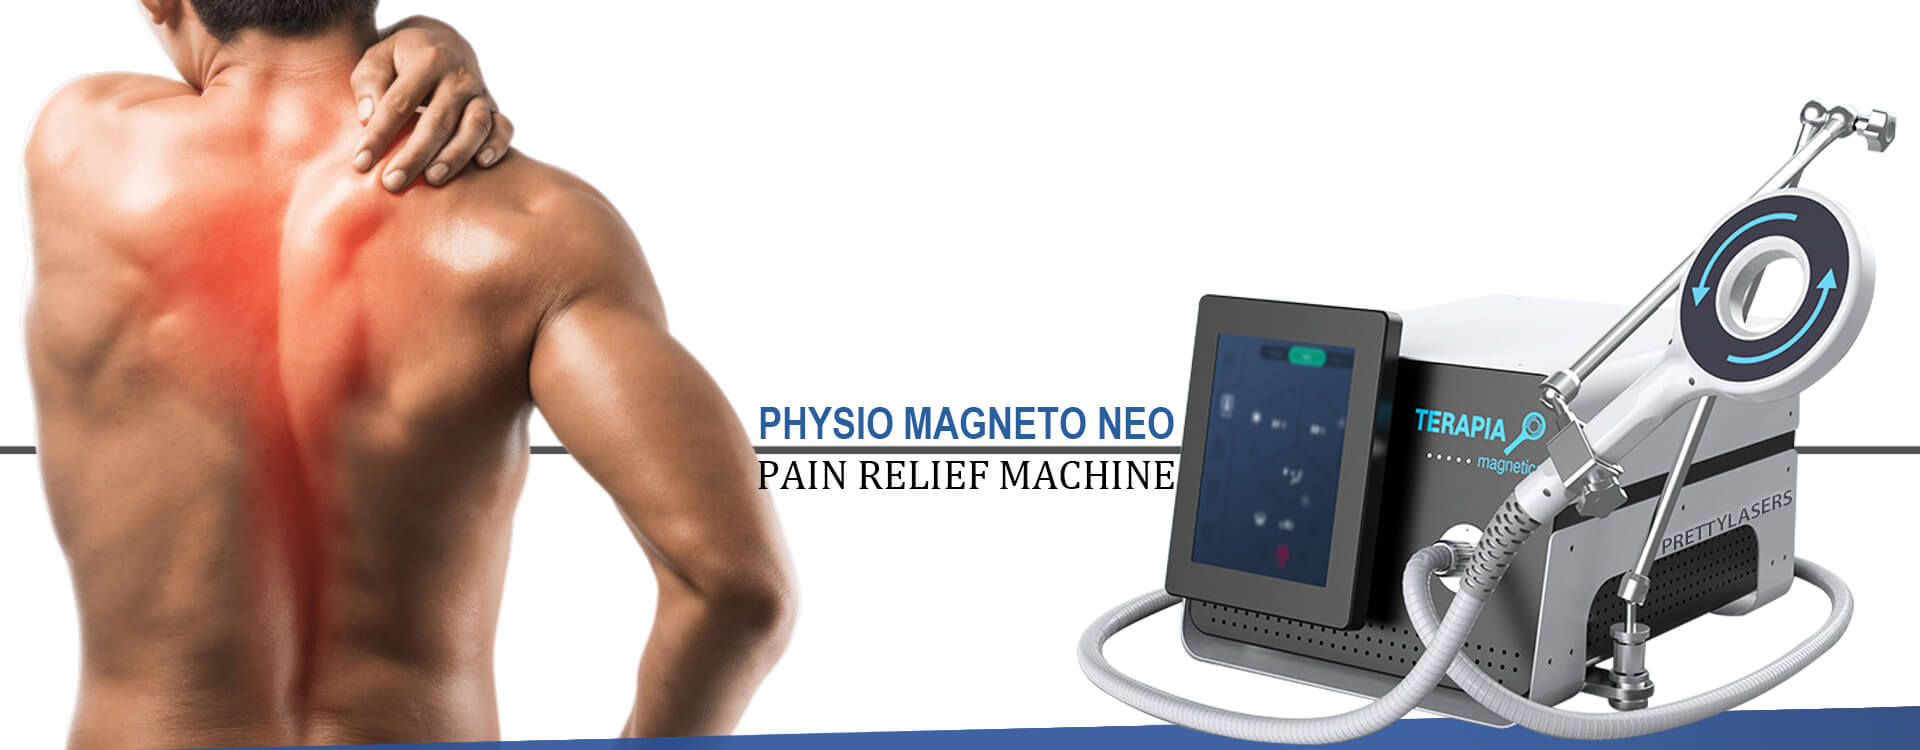 PMST PEMF EMTT Physio Magneto Therapy Magnetic Body Pain Relief Massager  Machine